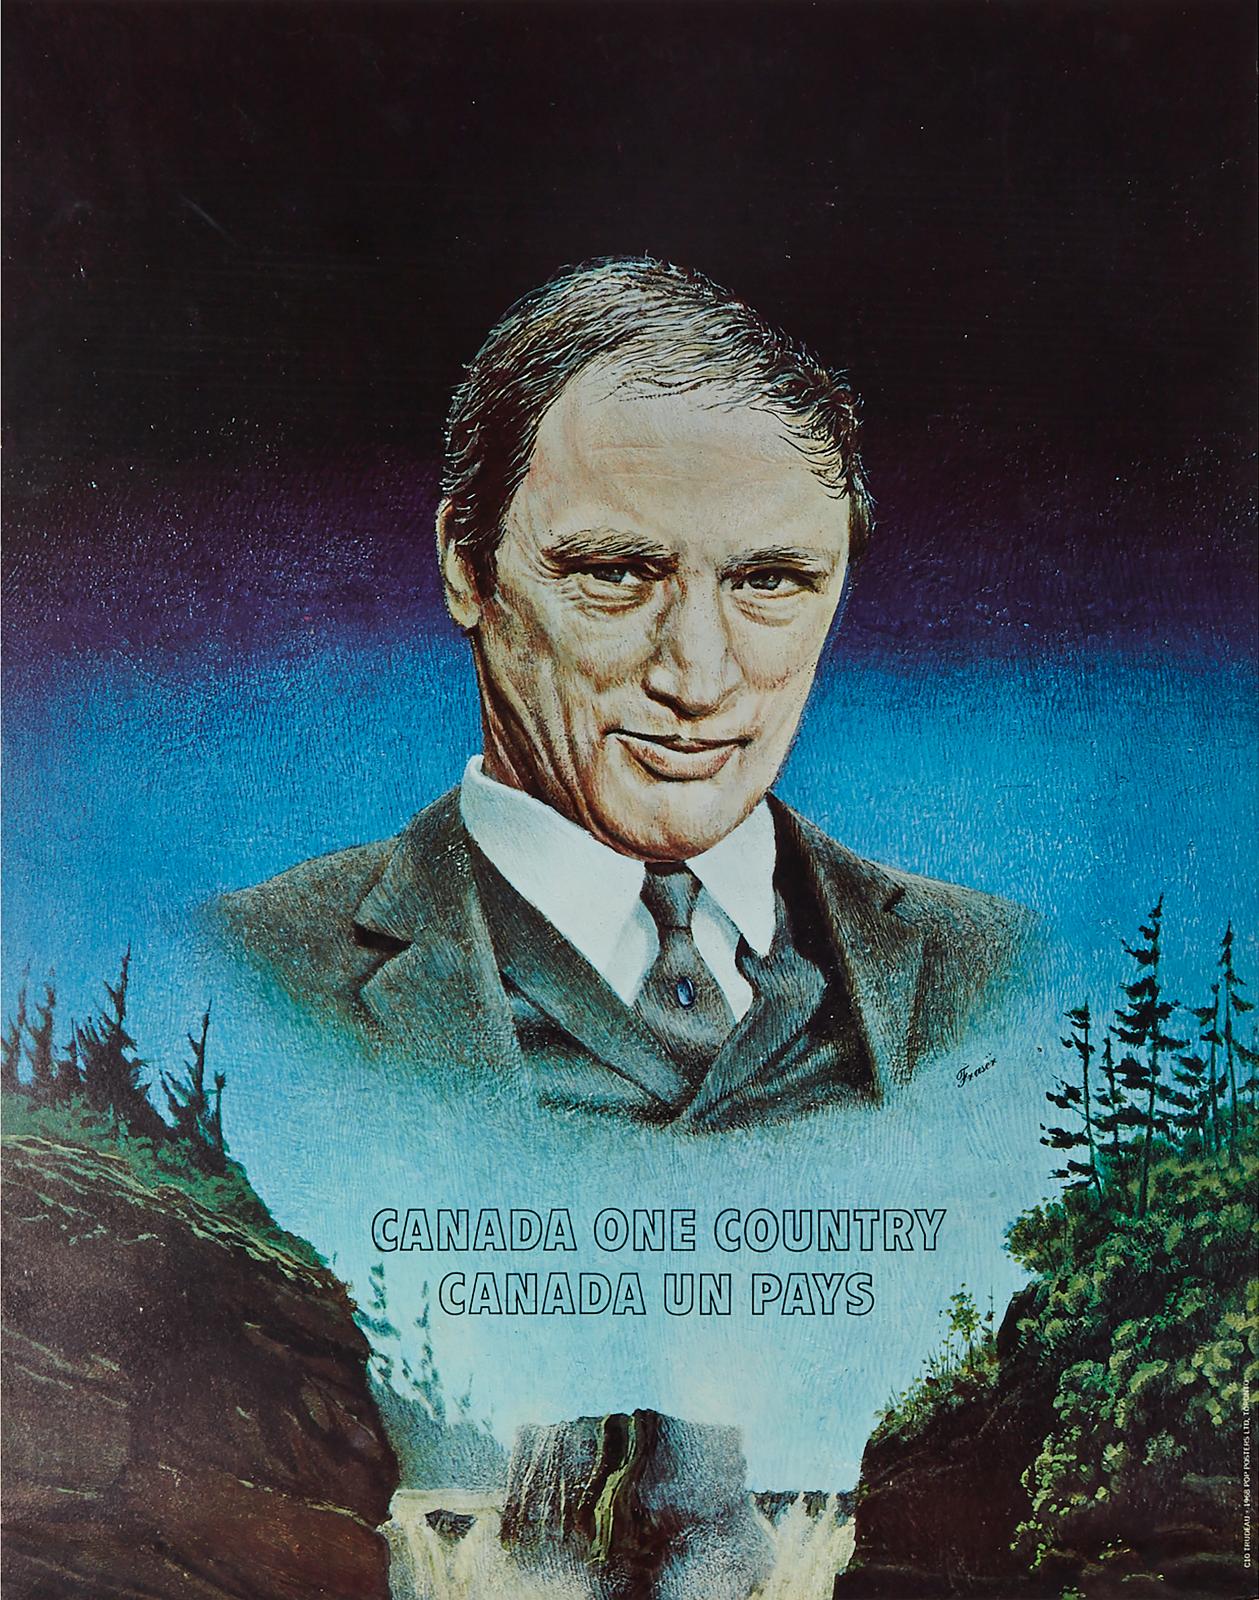 Pierre Elliot Trudeau Campaign Poster (1968) - Canada One Country/Canada Un Pay